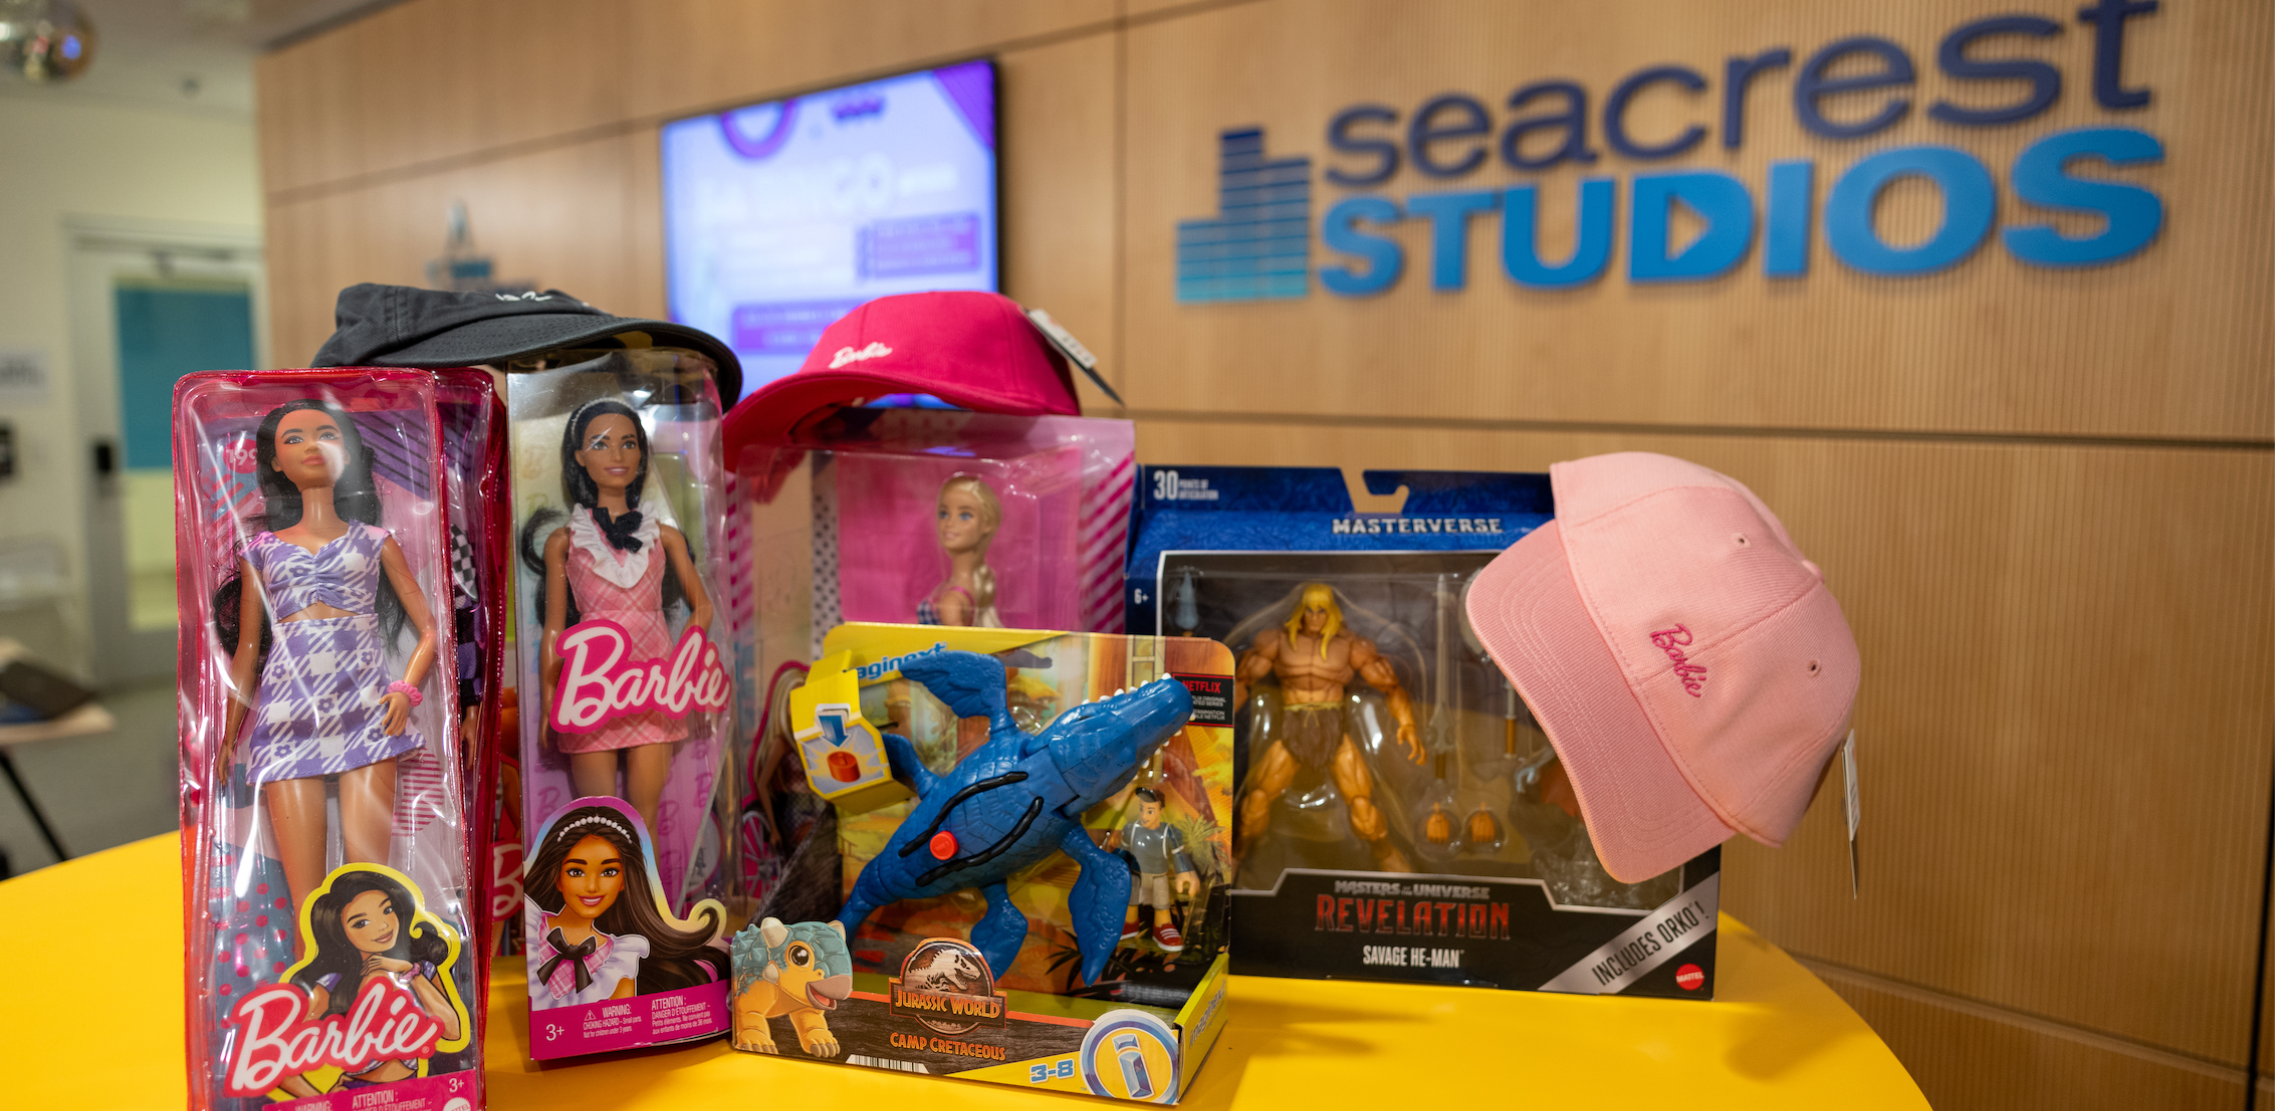 LYM and the Mattel Children's Foundation Partner to Bring Barbie Dreams to Children’s Hospital of Orange County